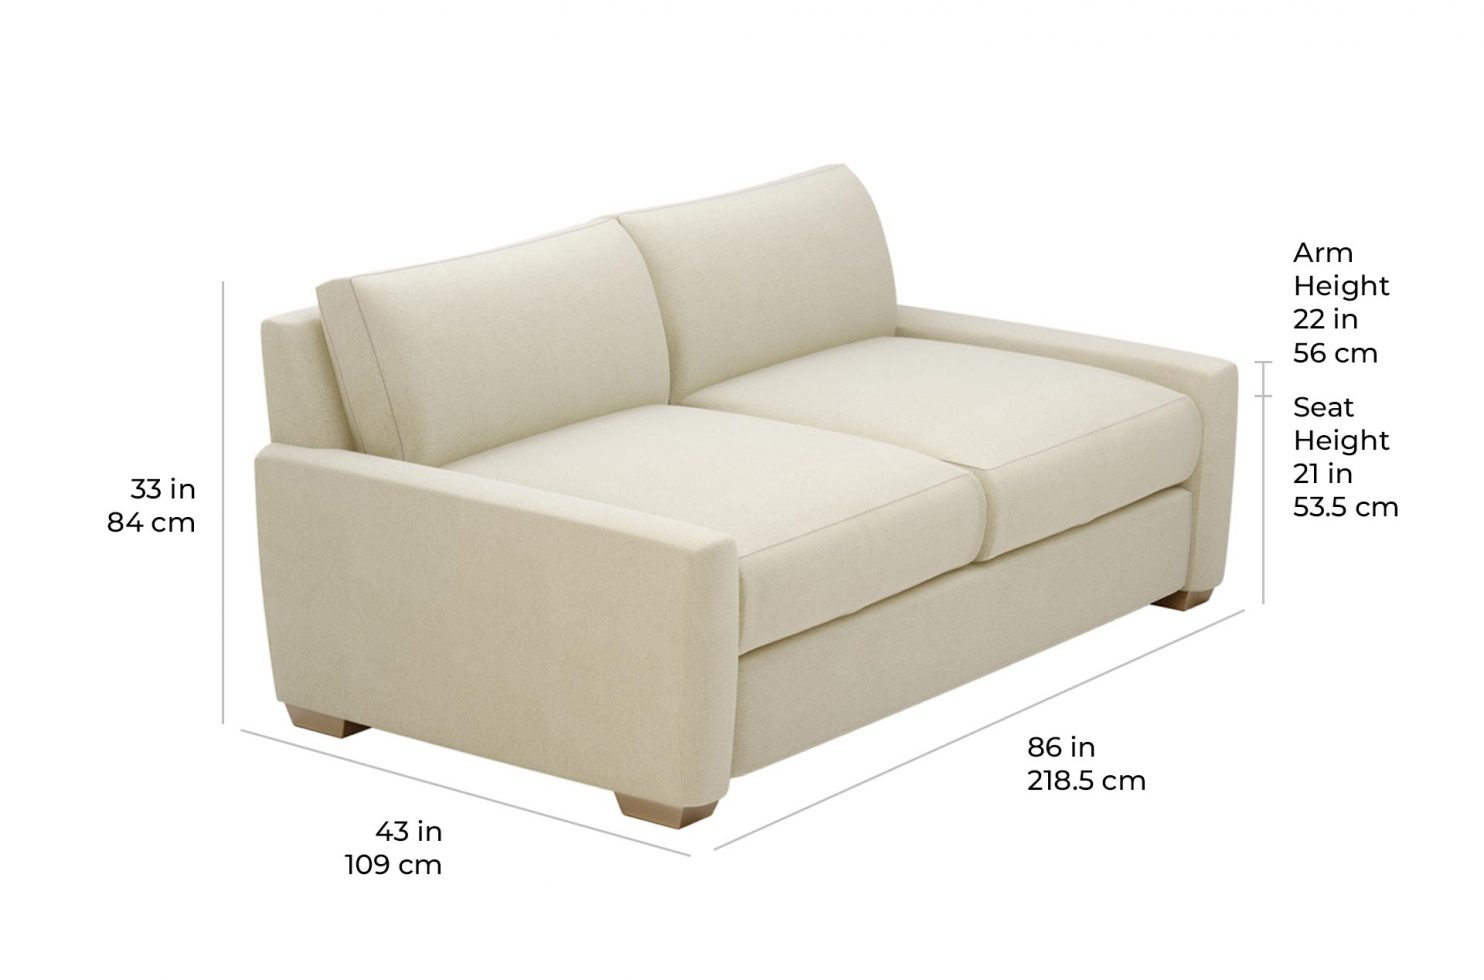 fizz imperial apartment sofa 105FT004P2 SS scale dims